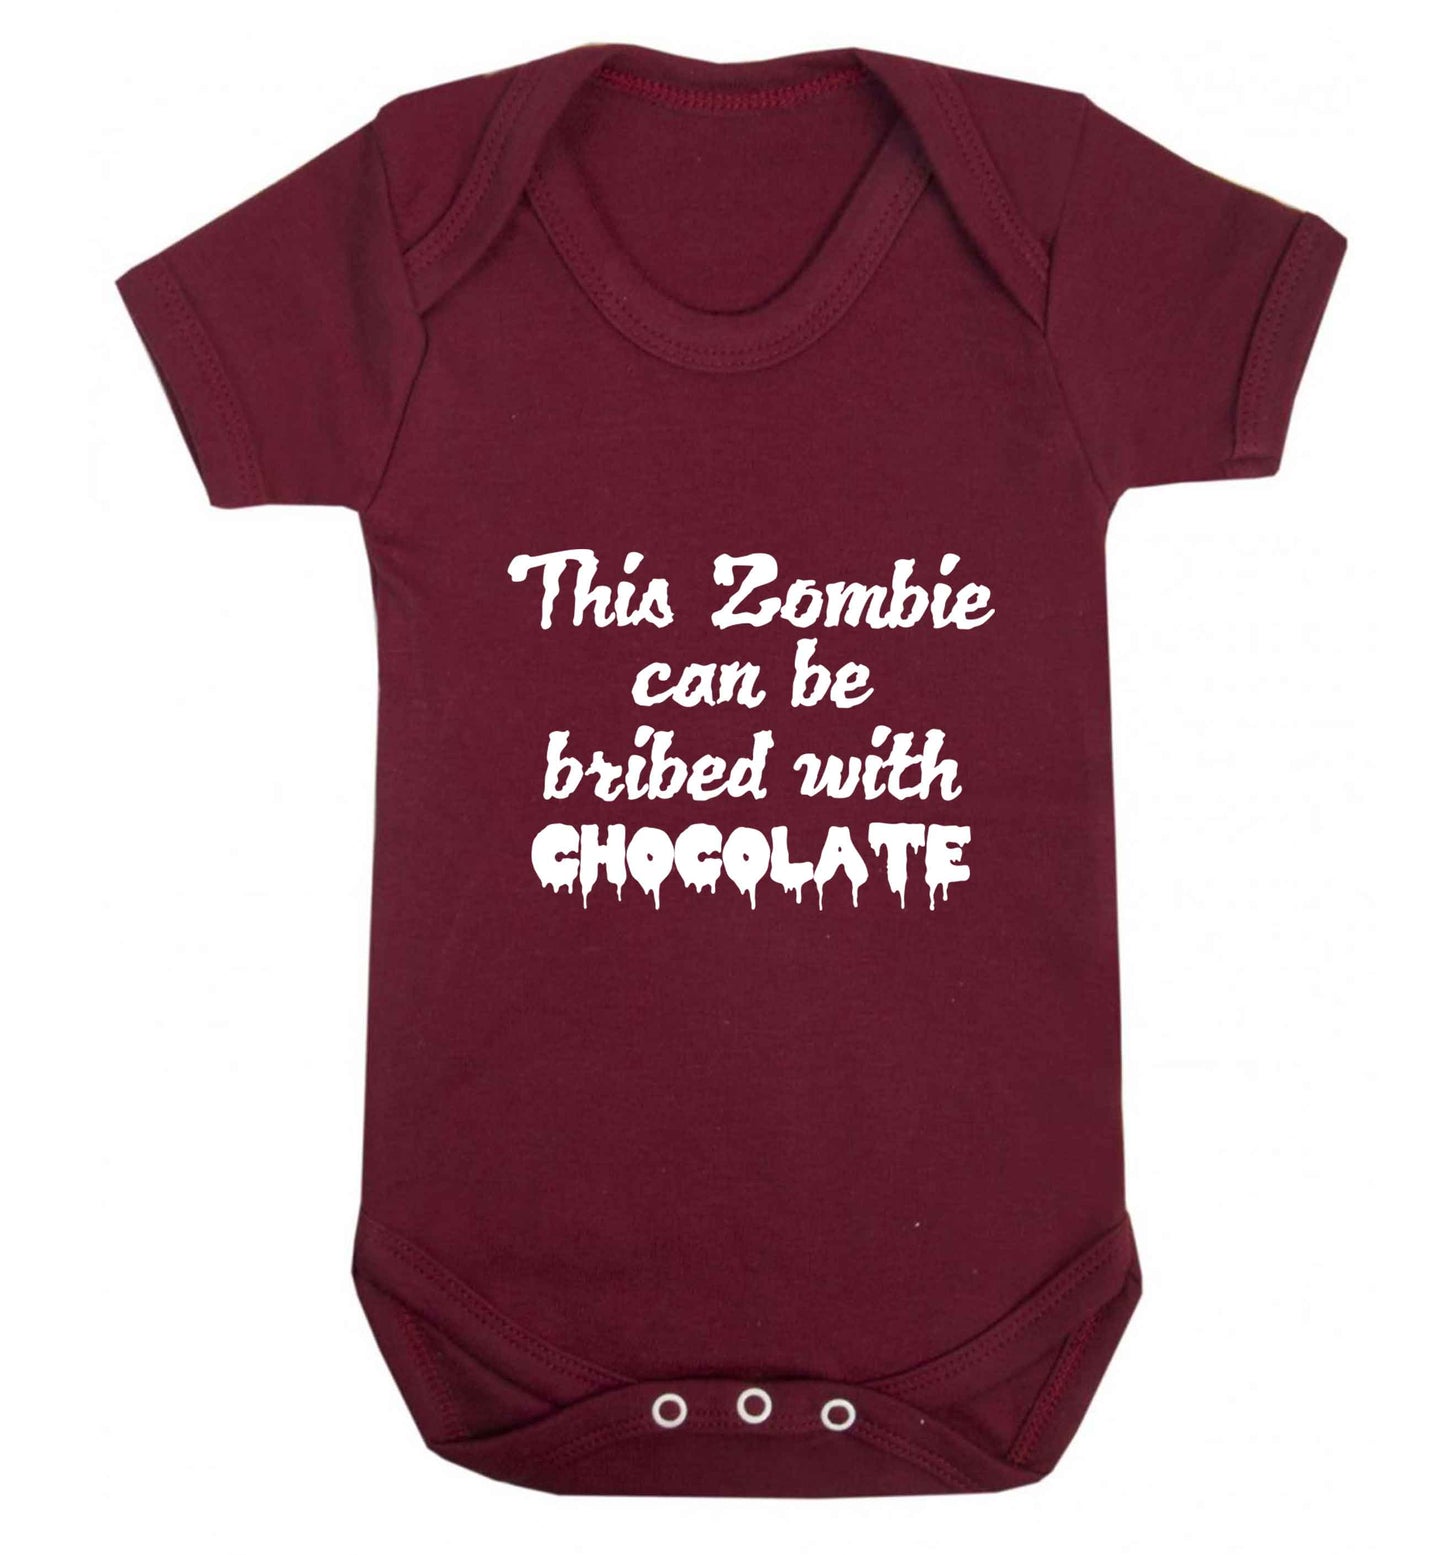 This zombie can be bribed with chocolate baby vest maroon 18-24 months